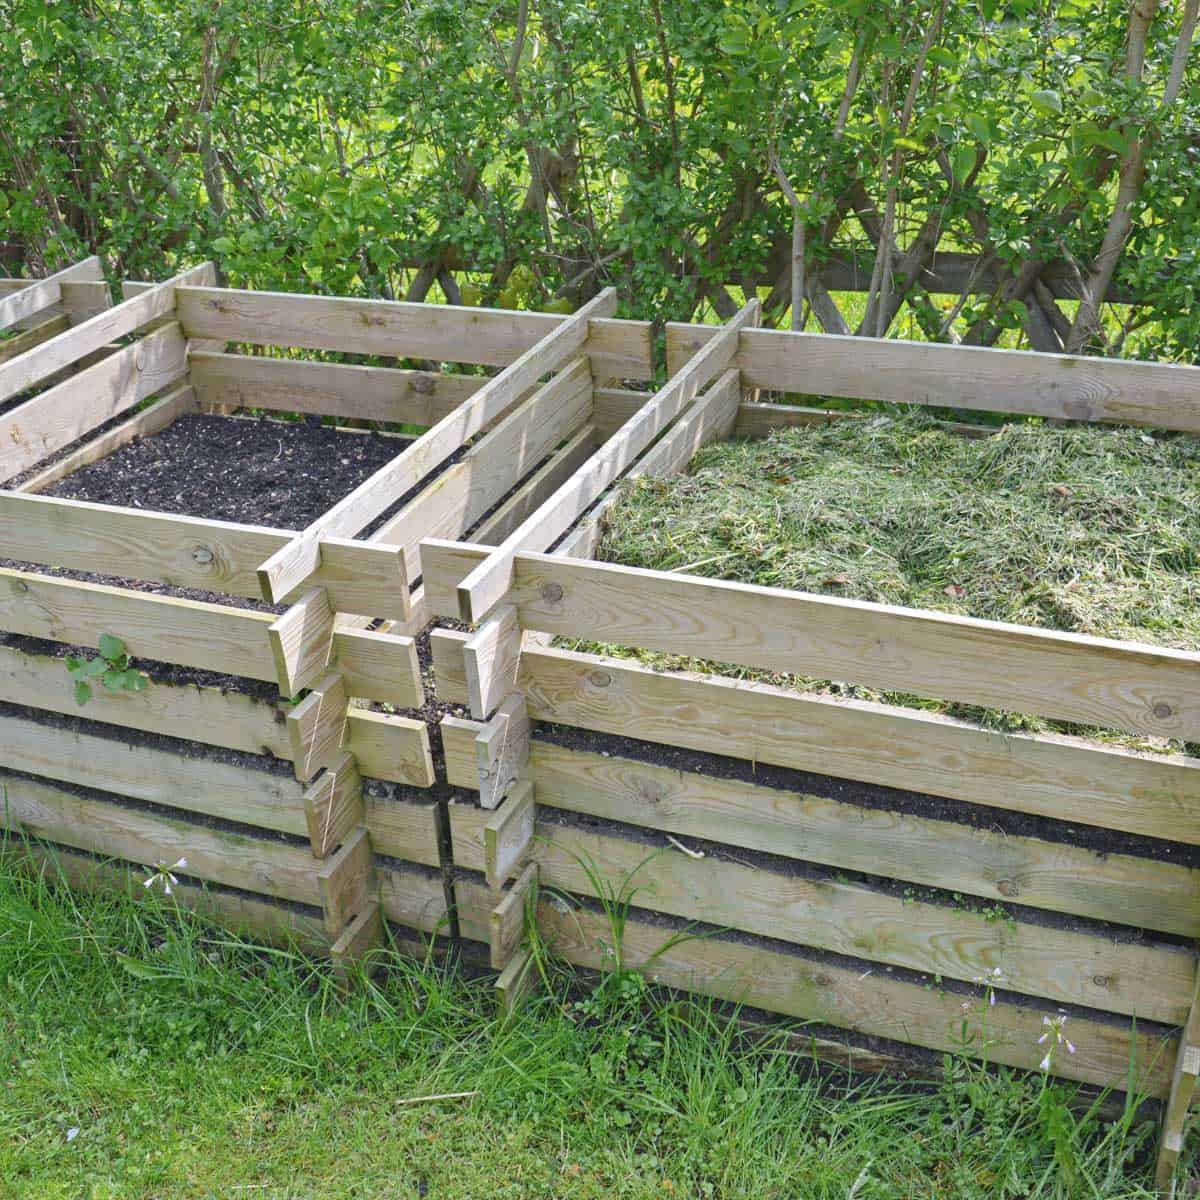 Compost bins located in an ideal location in a partially shaded area.